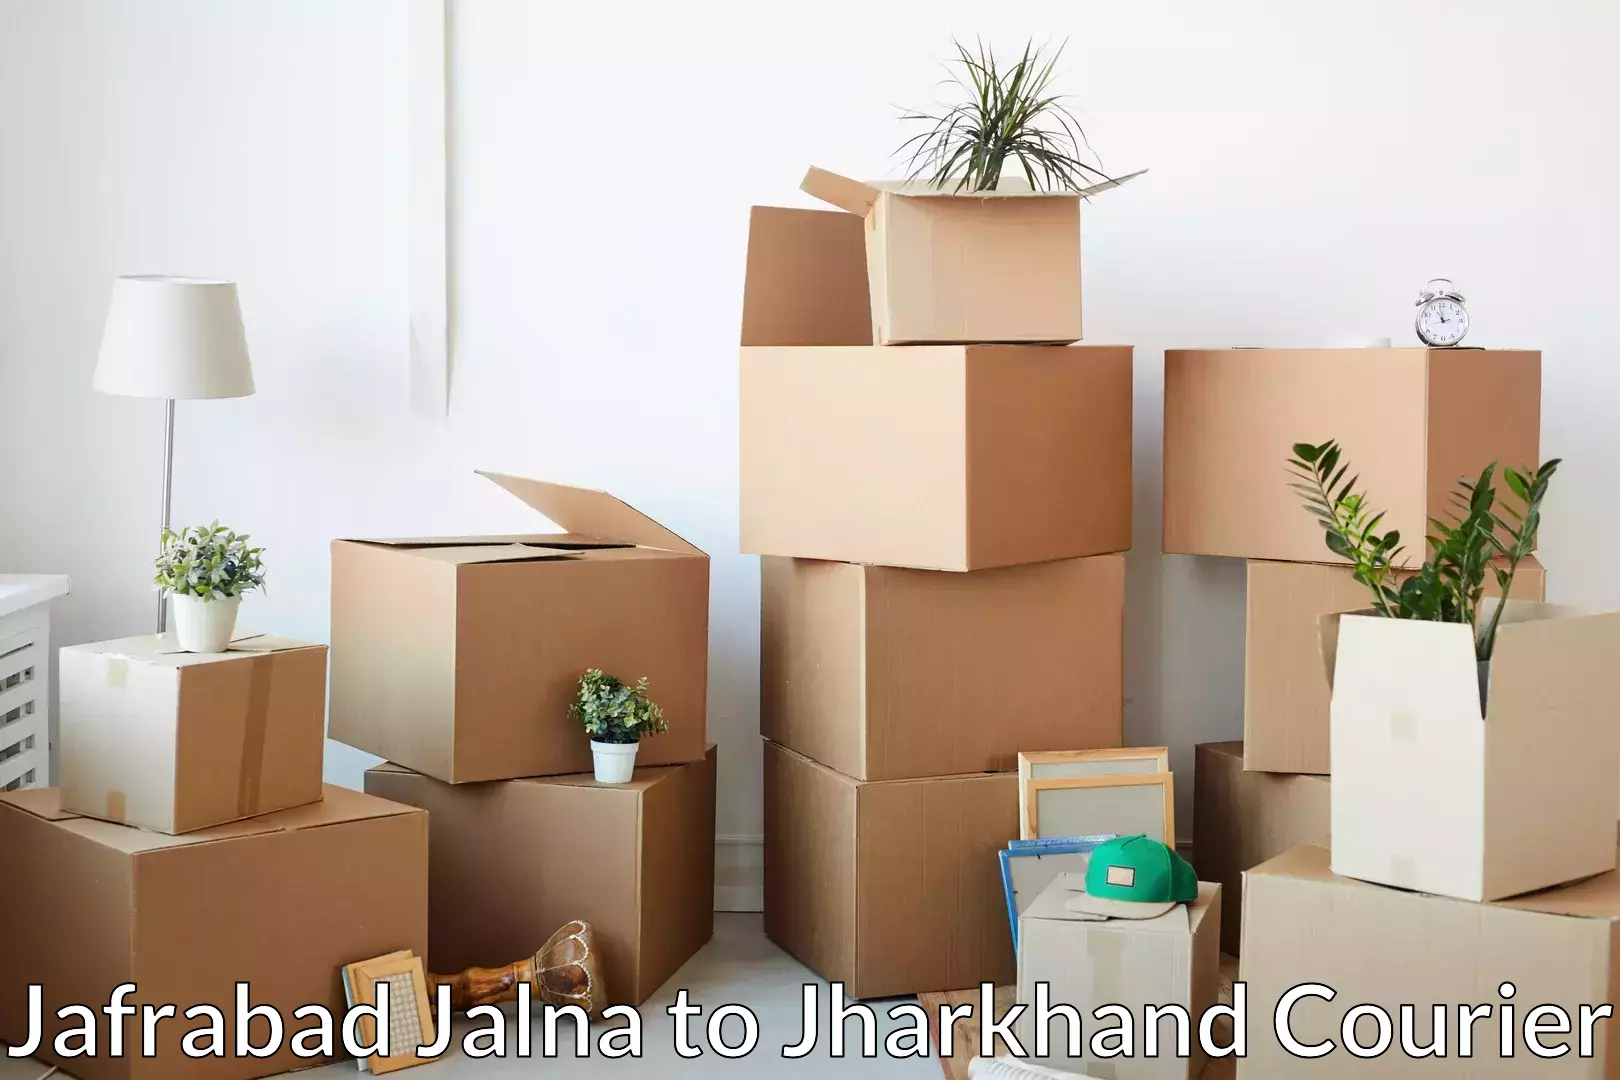 Residential moving experts Jafrabad Jalna to Giridih